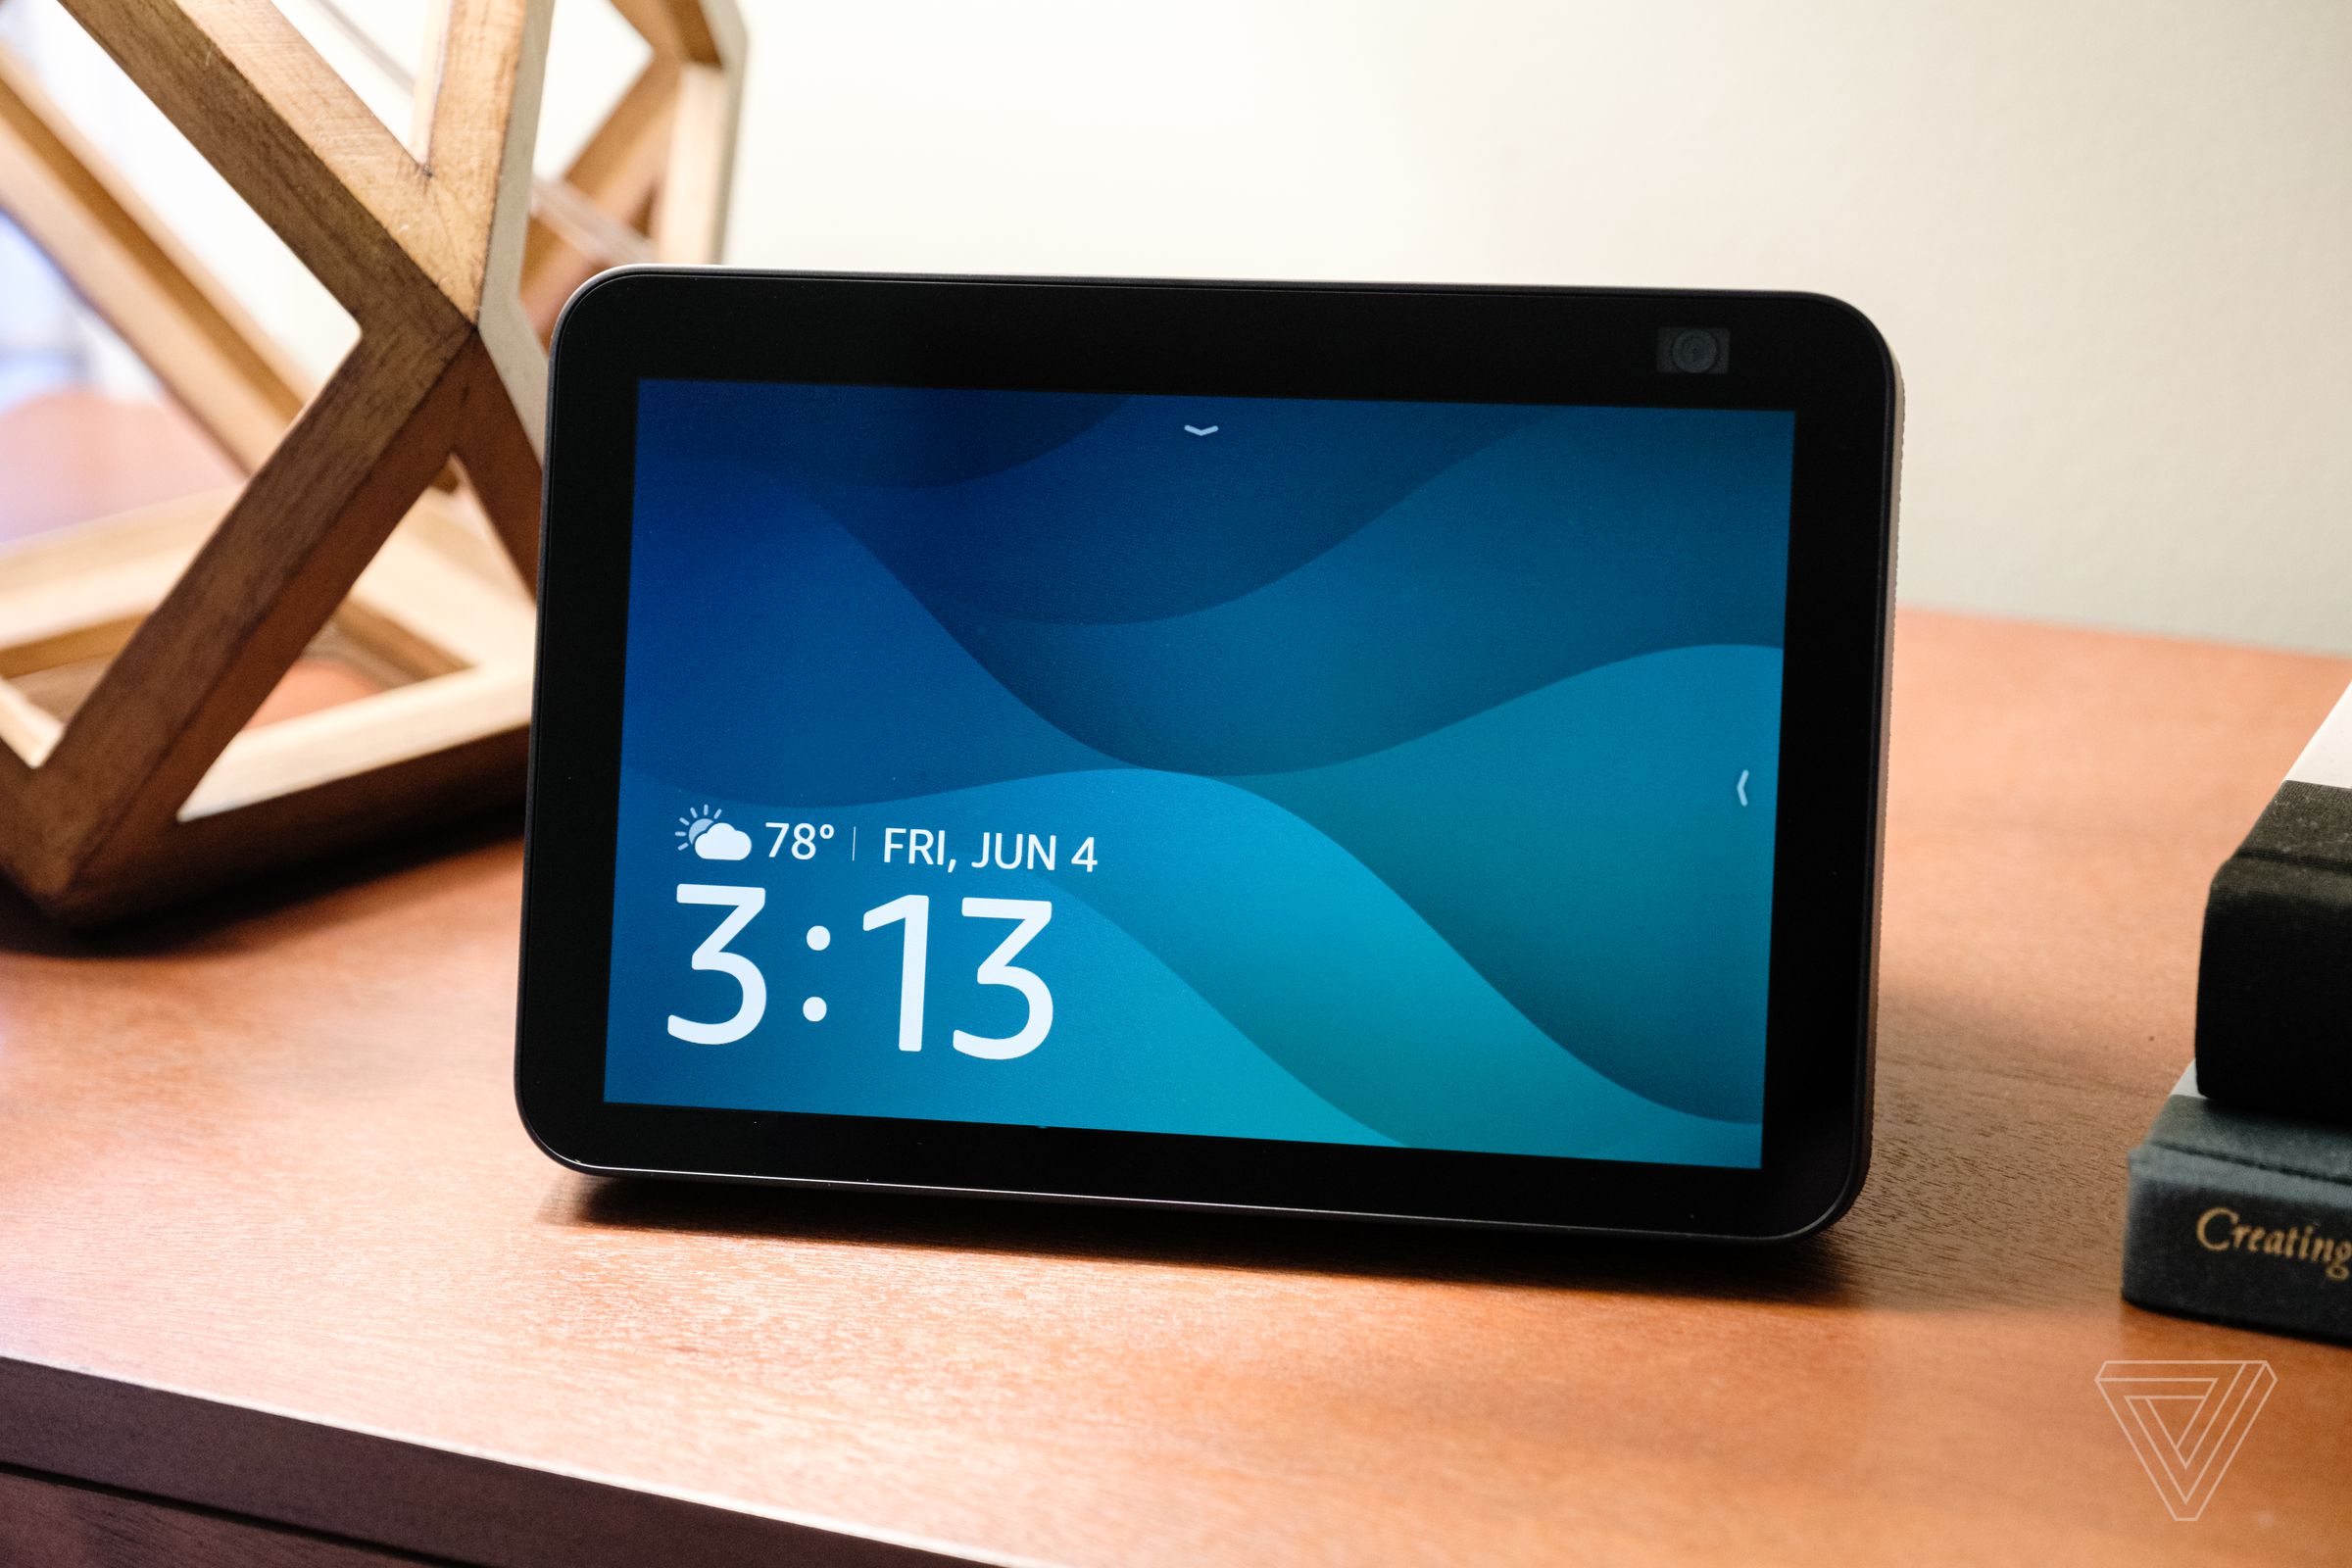 The second-gen Echo Show 8 with its main screen on display and resting on a table.